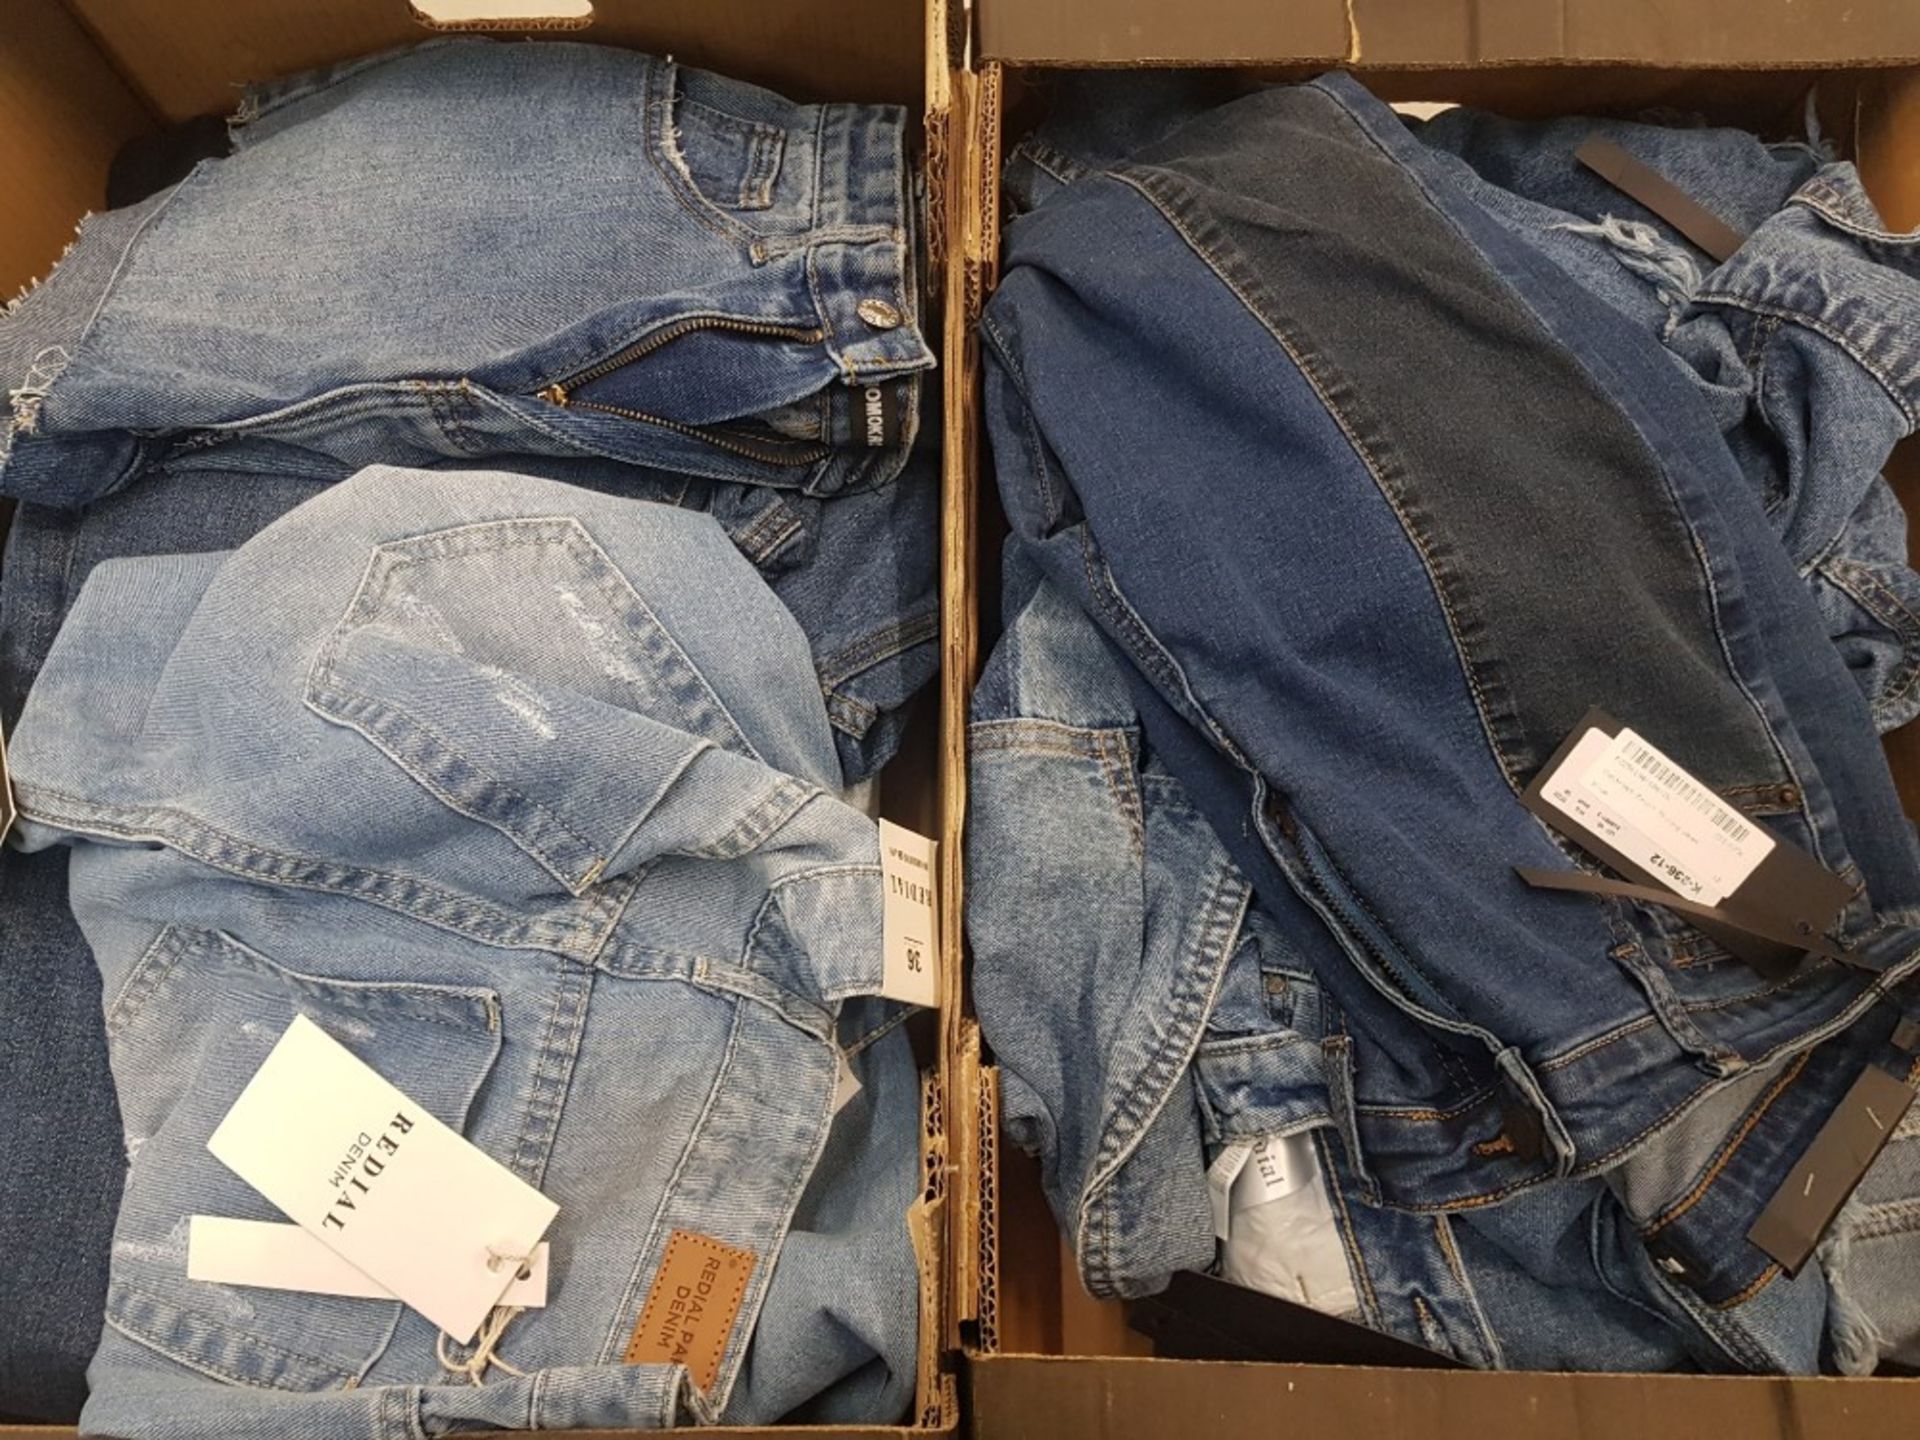 A quantity of BNWT ladies denim clothing items, jeans, shorts, jackets, mixed sizes (2 trays).